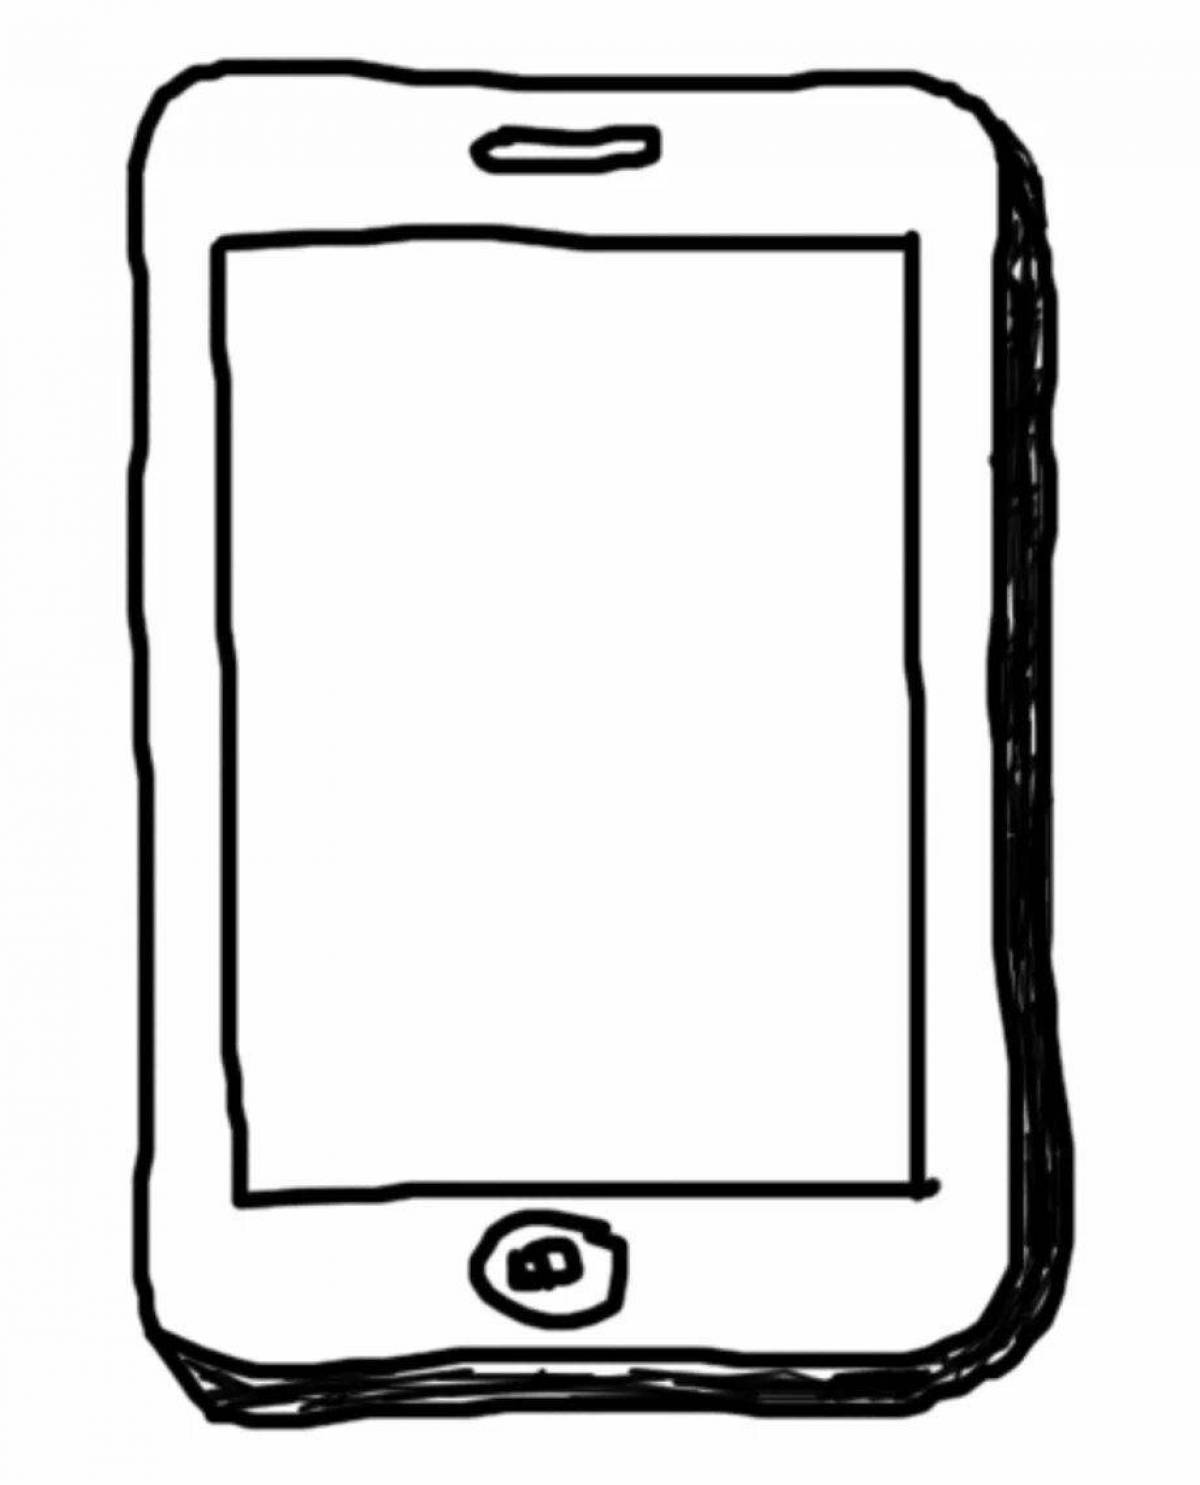 Creative phones and tablets coloring book